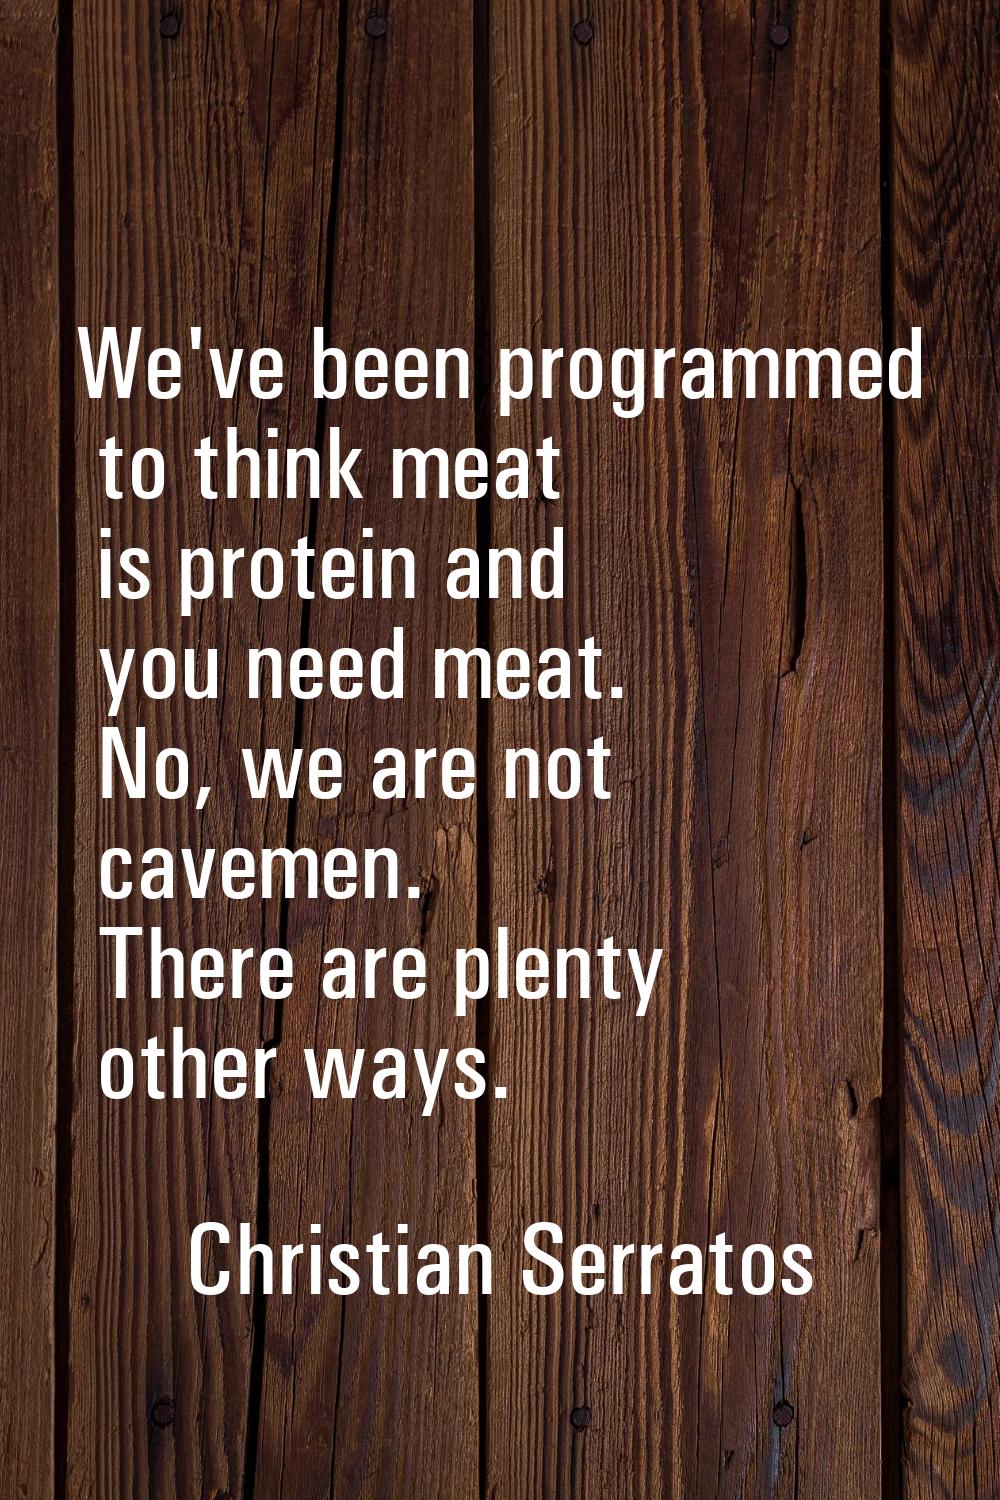 We've been programmed to think meat is protein and you need meat. No, we are not cavemen. There are